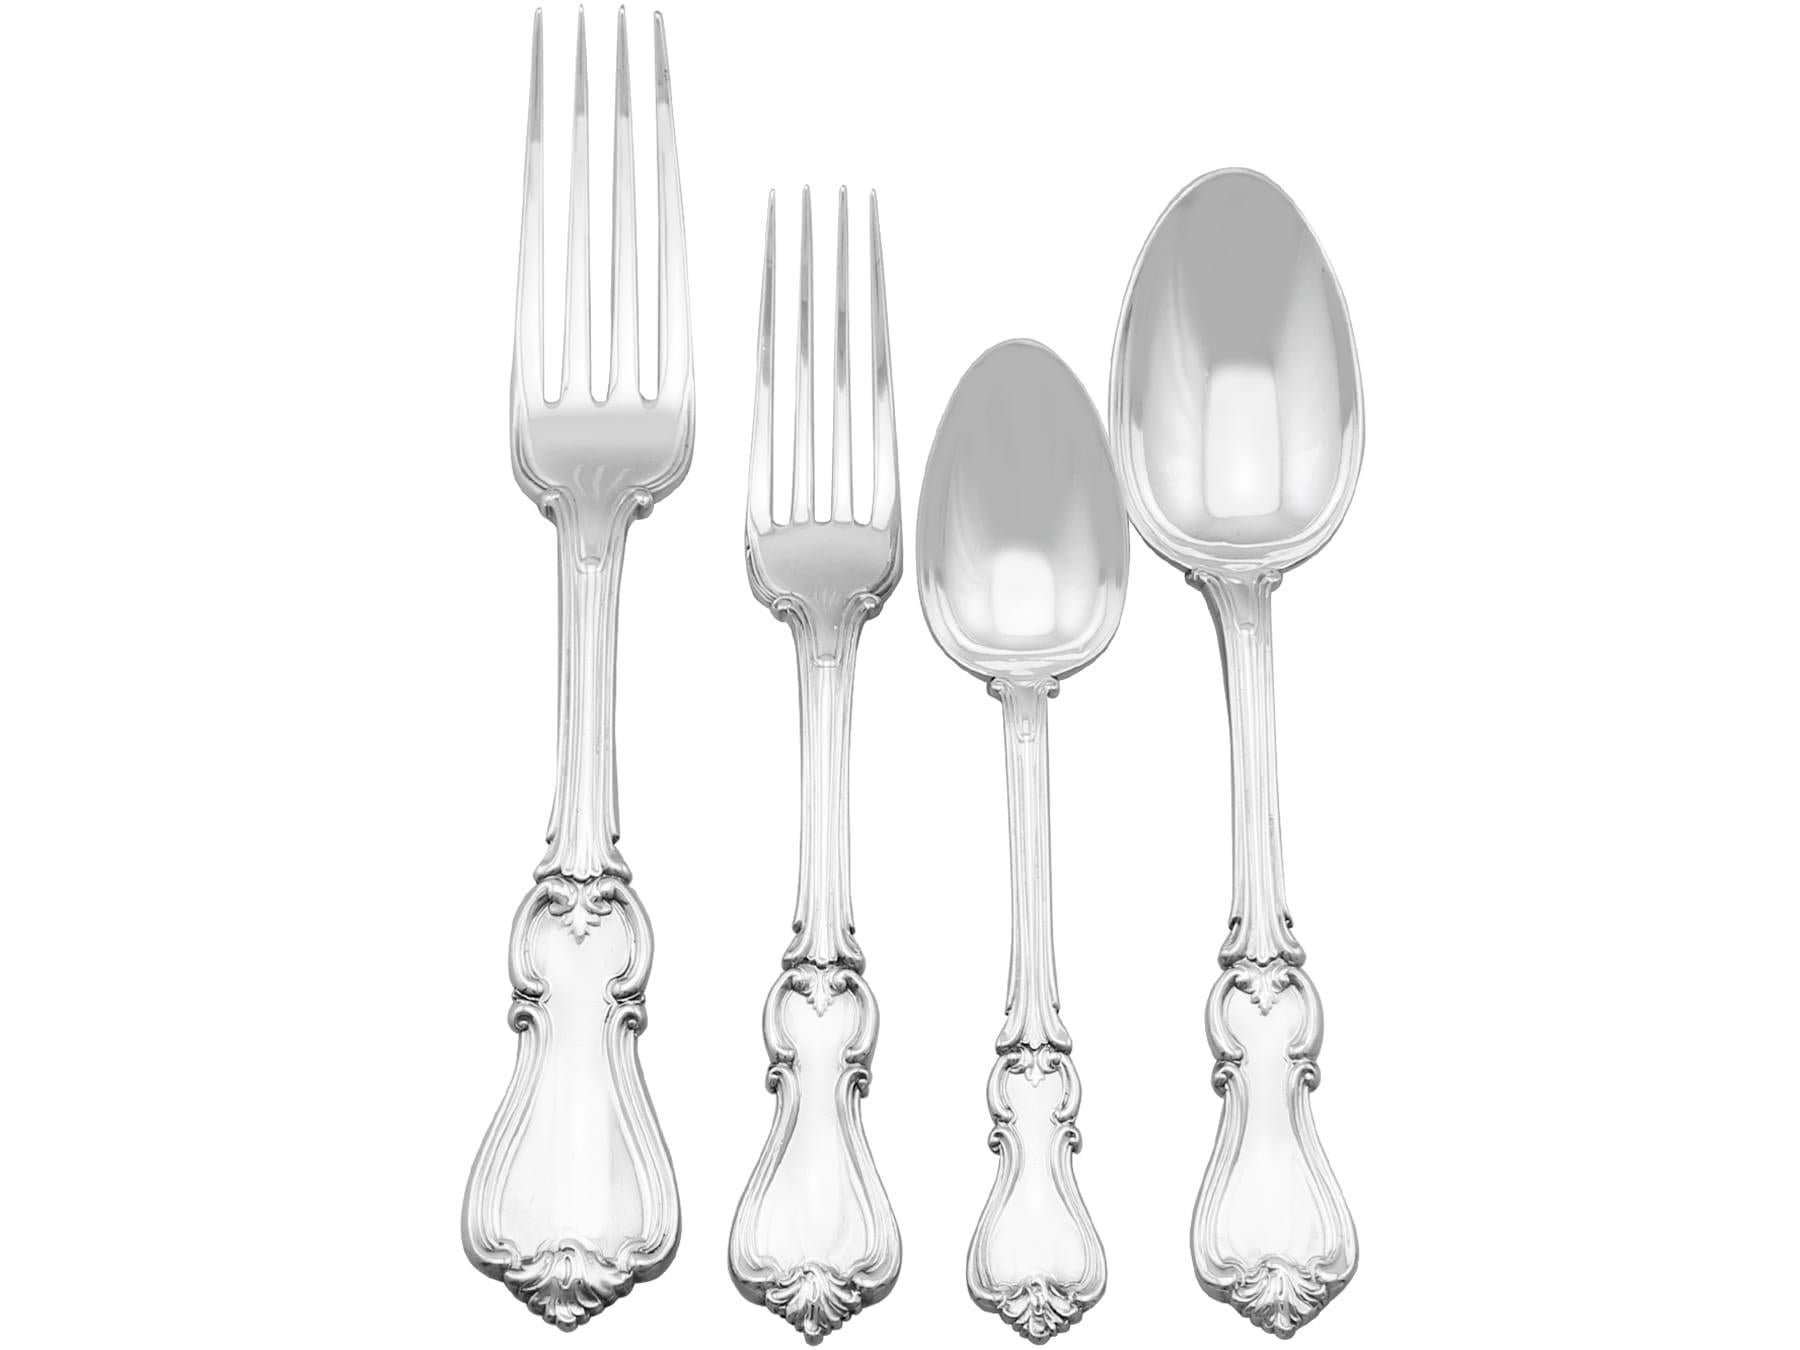 An exceptional, fine and impressive antique Victorian English sterling silver comprehensive Albert pattern flatware service for twenty-four persons; an addition to our canteen of cutlery collection.

The pieces of this exceptional, antique Victorian